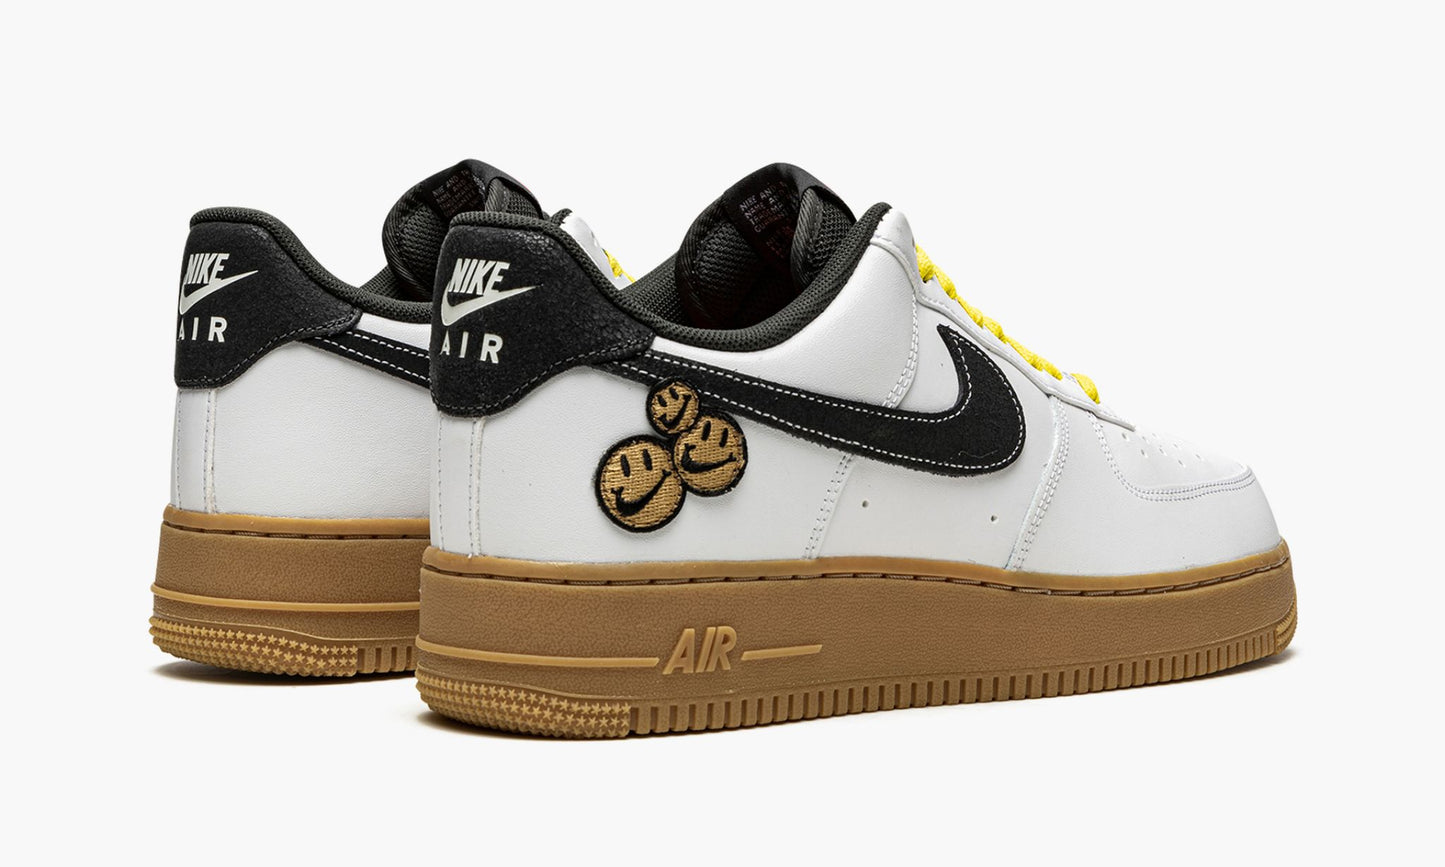 Nike Air Force 1 Low '07 LV8 "Go The Extra The Smile"